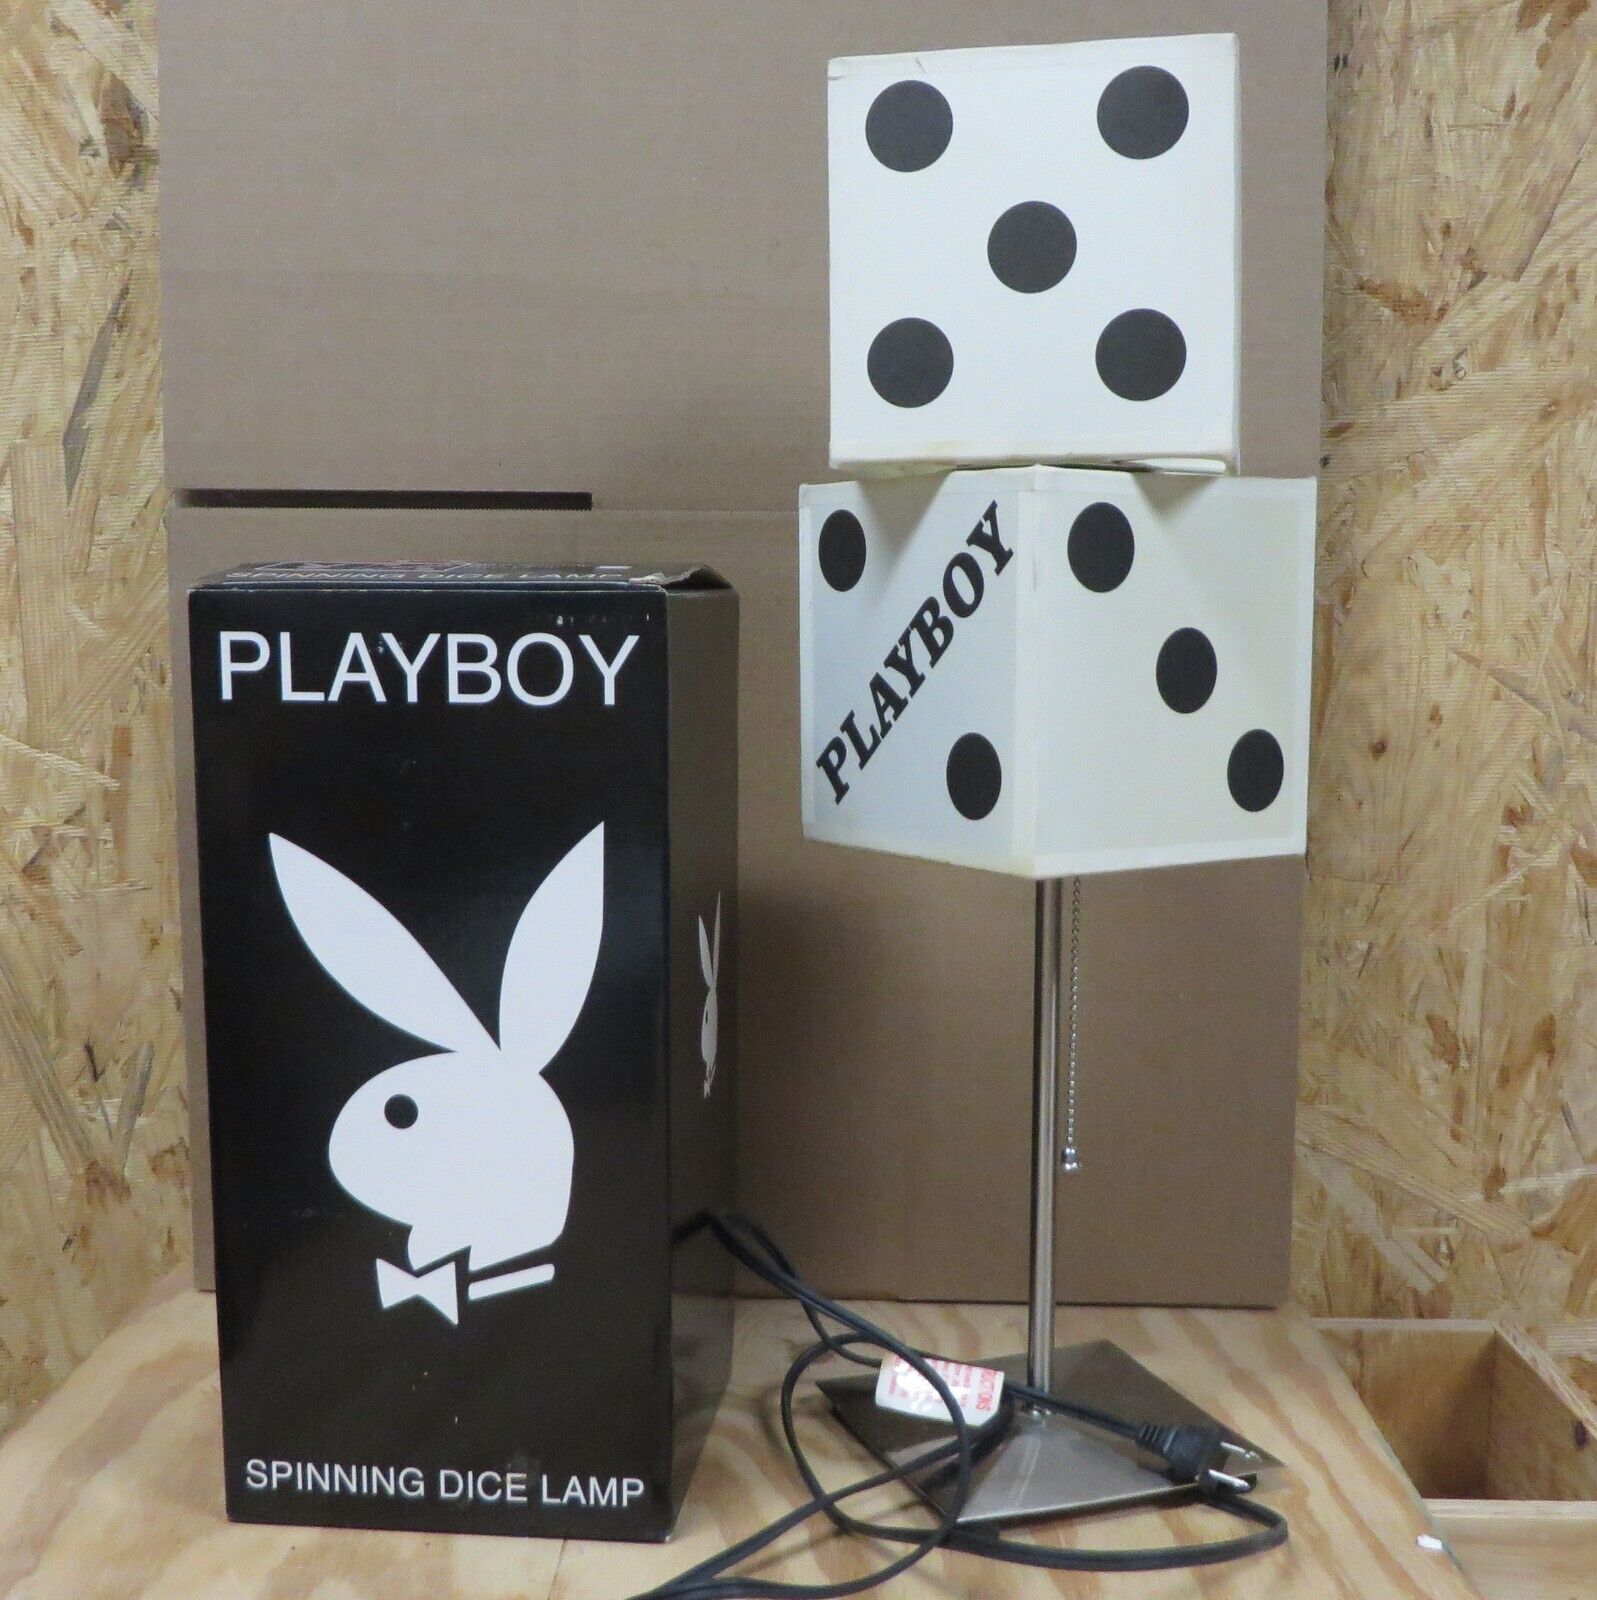 PLAYBOY SPINNING DICE LAMP Vintage In Box Black & White Tested Functional